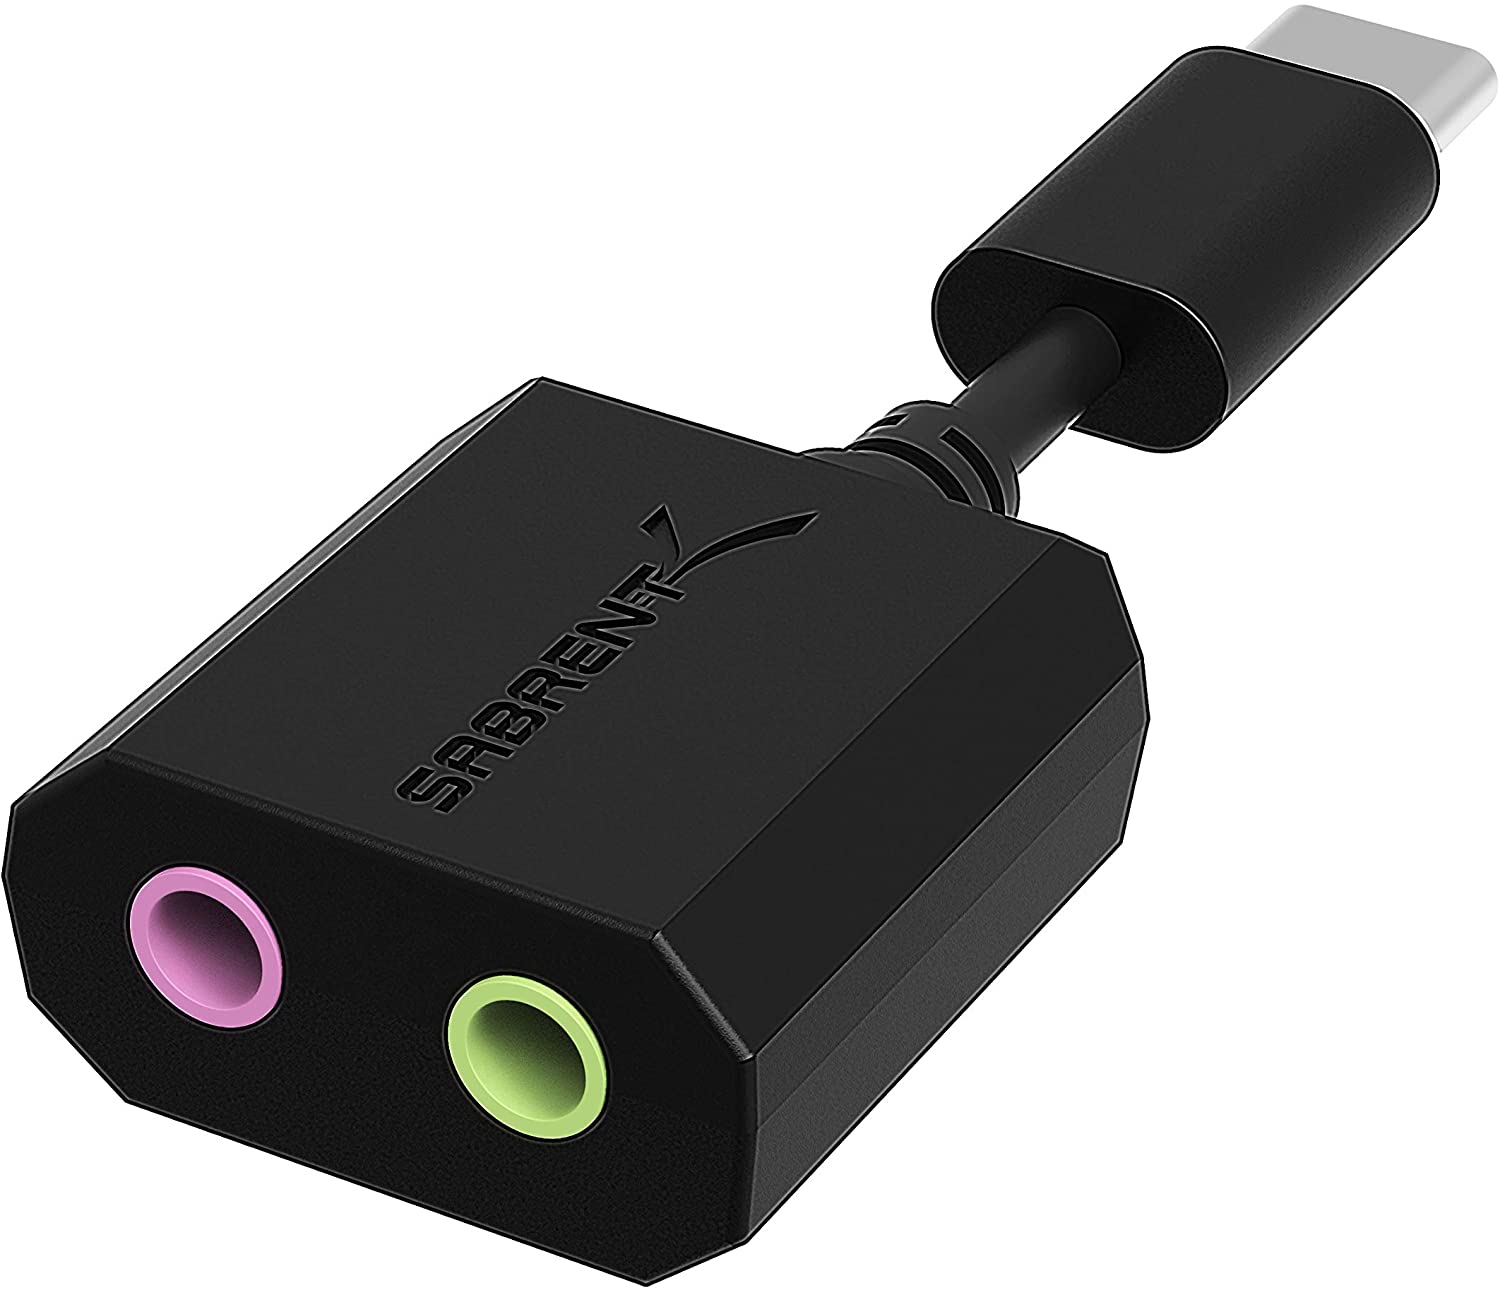 sabrent usb external stereo sound adapter for windows and mac. plug and play no drivers needed